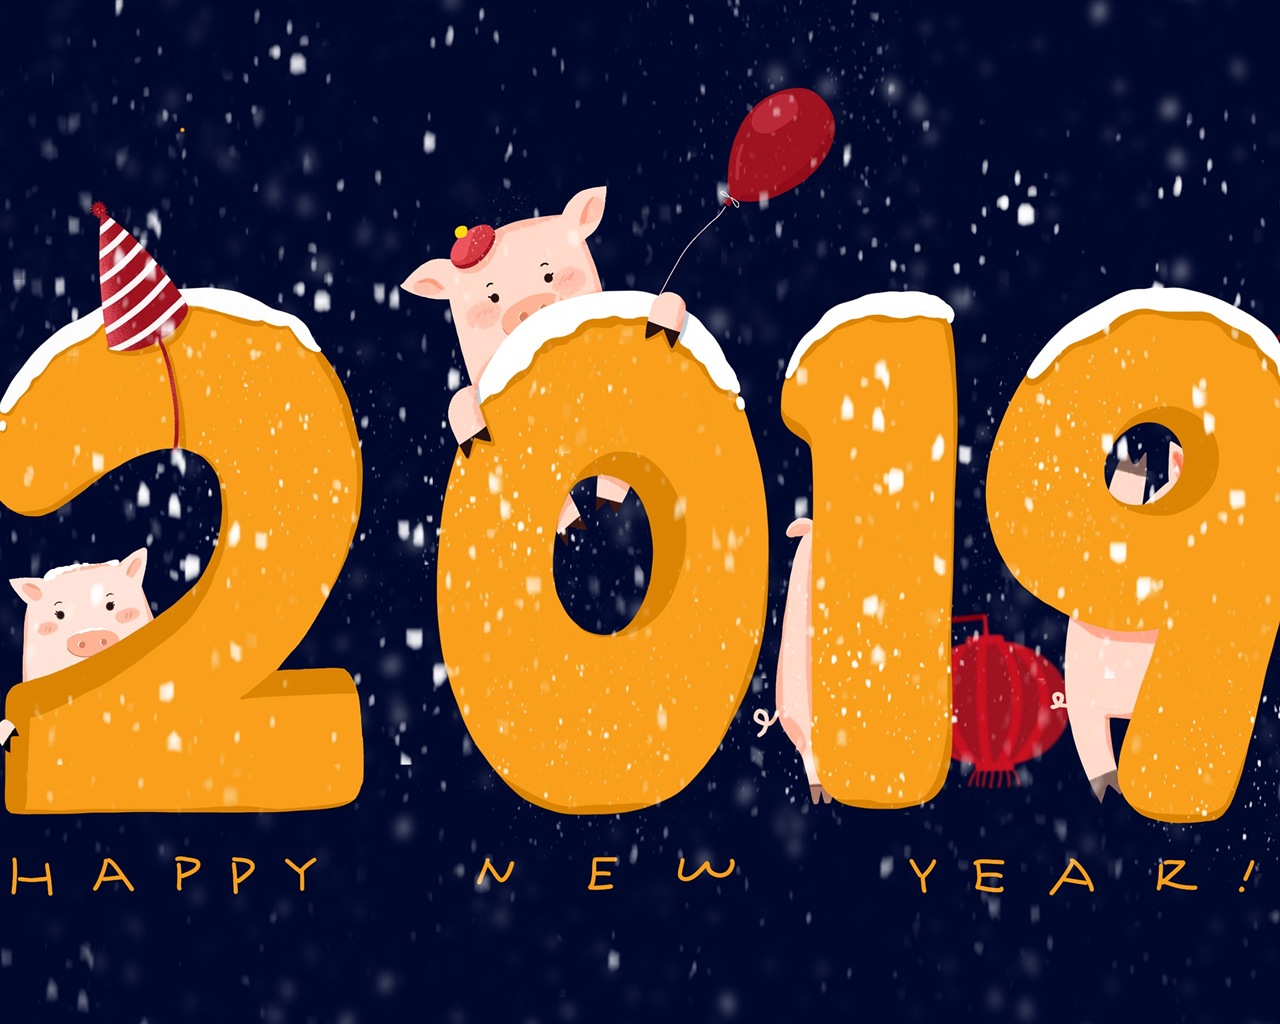 Happy New Year 2019 HD wallpapers #18 - 1280x1024